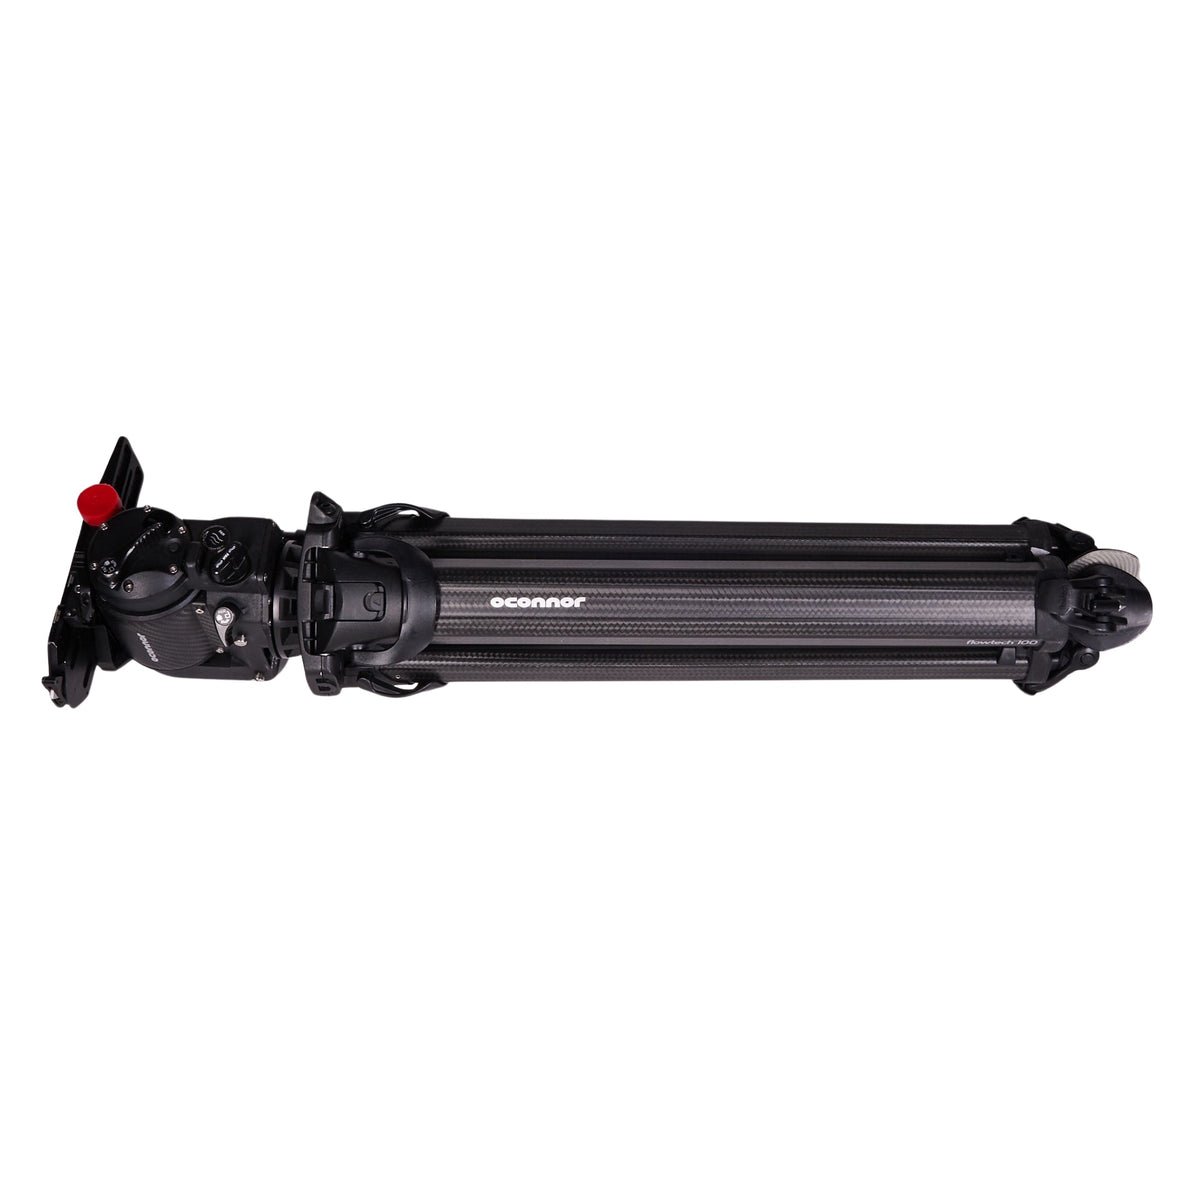 ACC3505 O&#39;Connor 1040 Fluid Head and flowtech 100 Tripod System with Handle and Case_000736.JPG